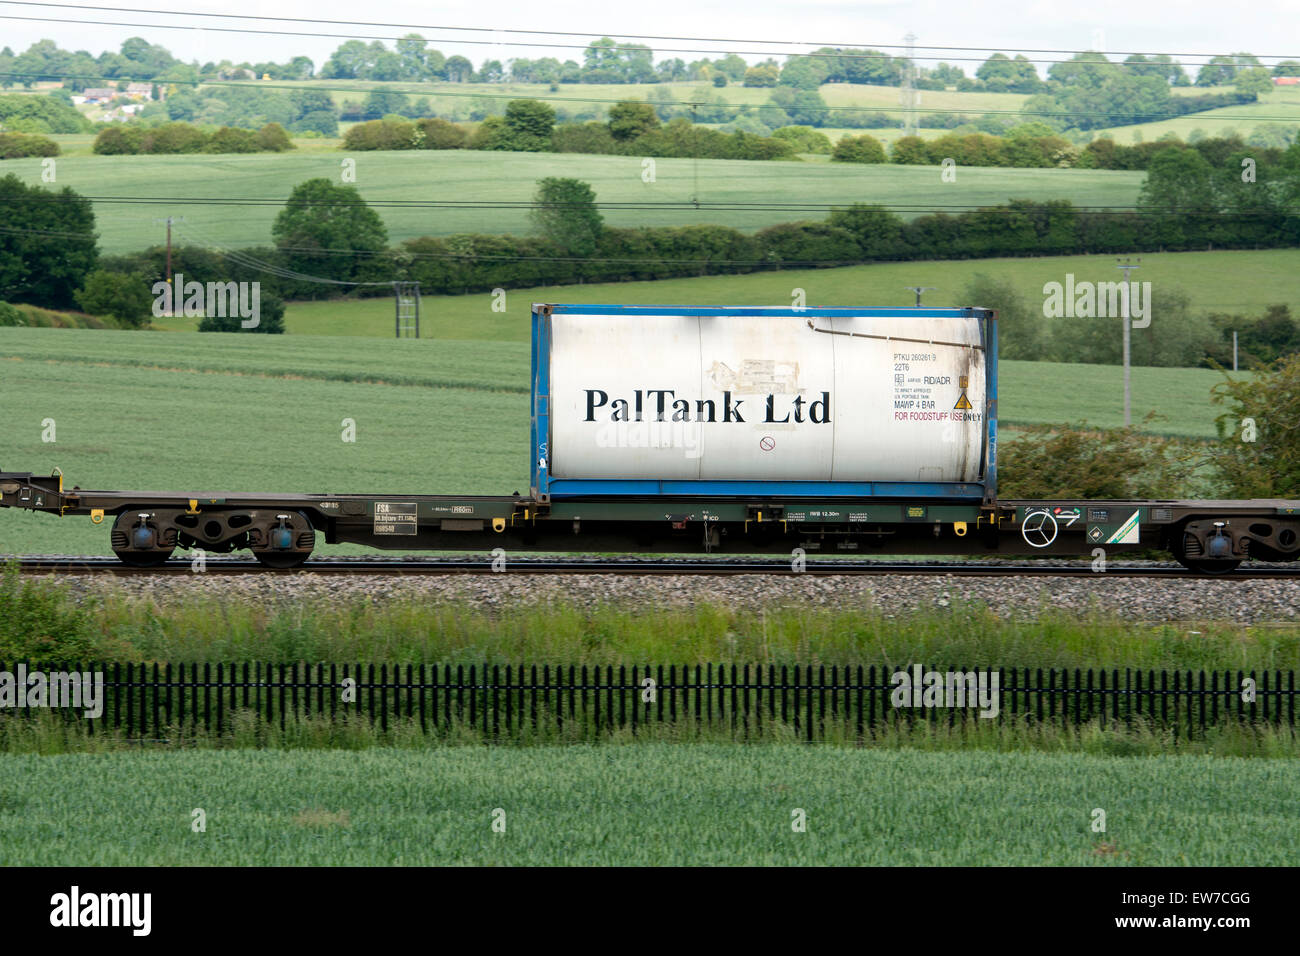 PalTank foodstuff container  on a train, Northamptonshire, UK Stock Photo